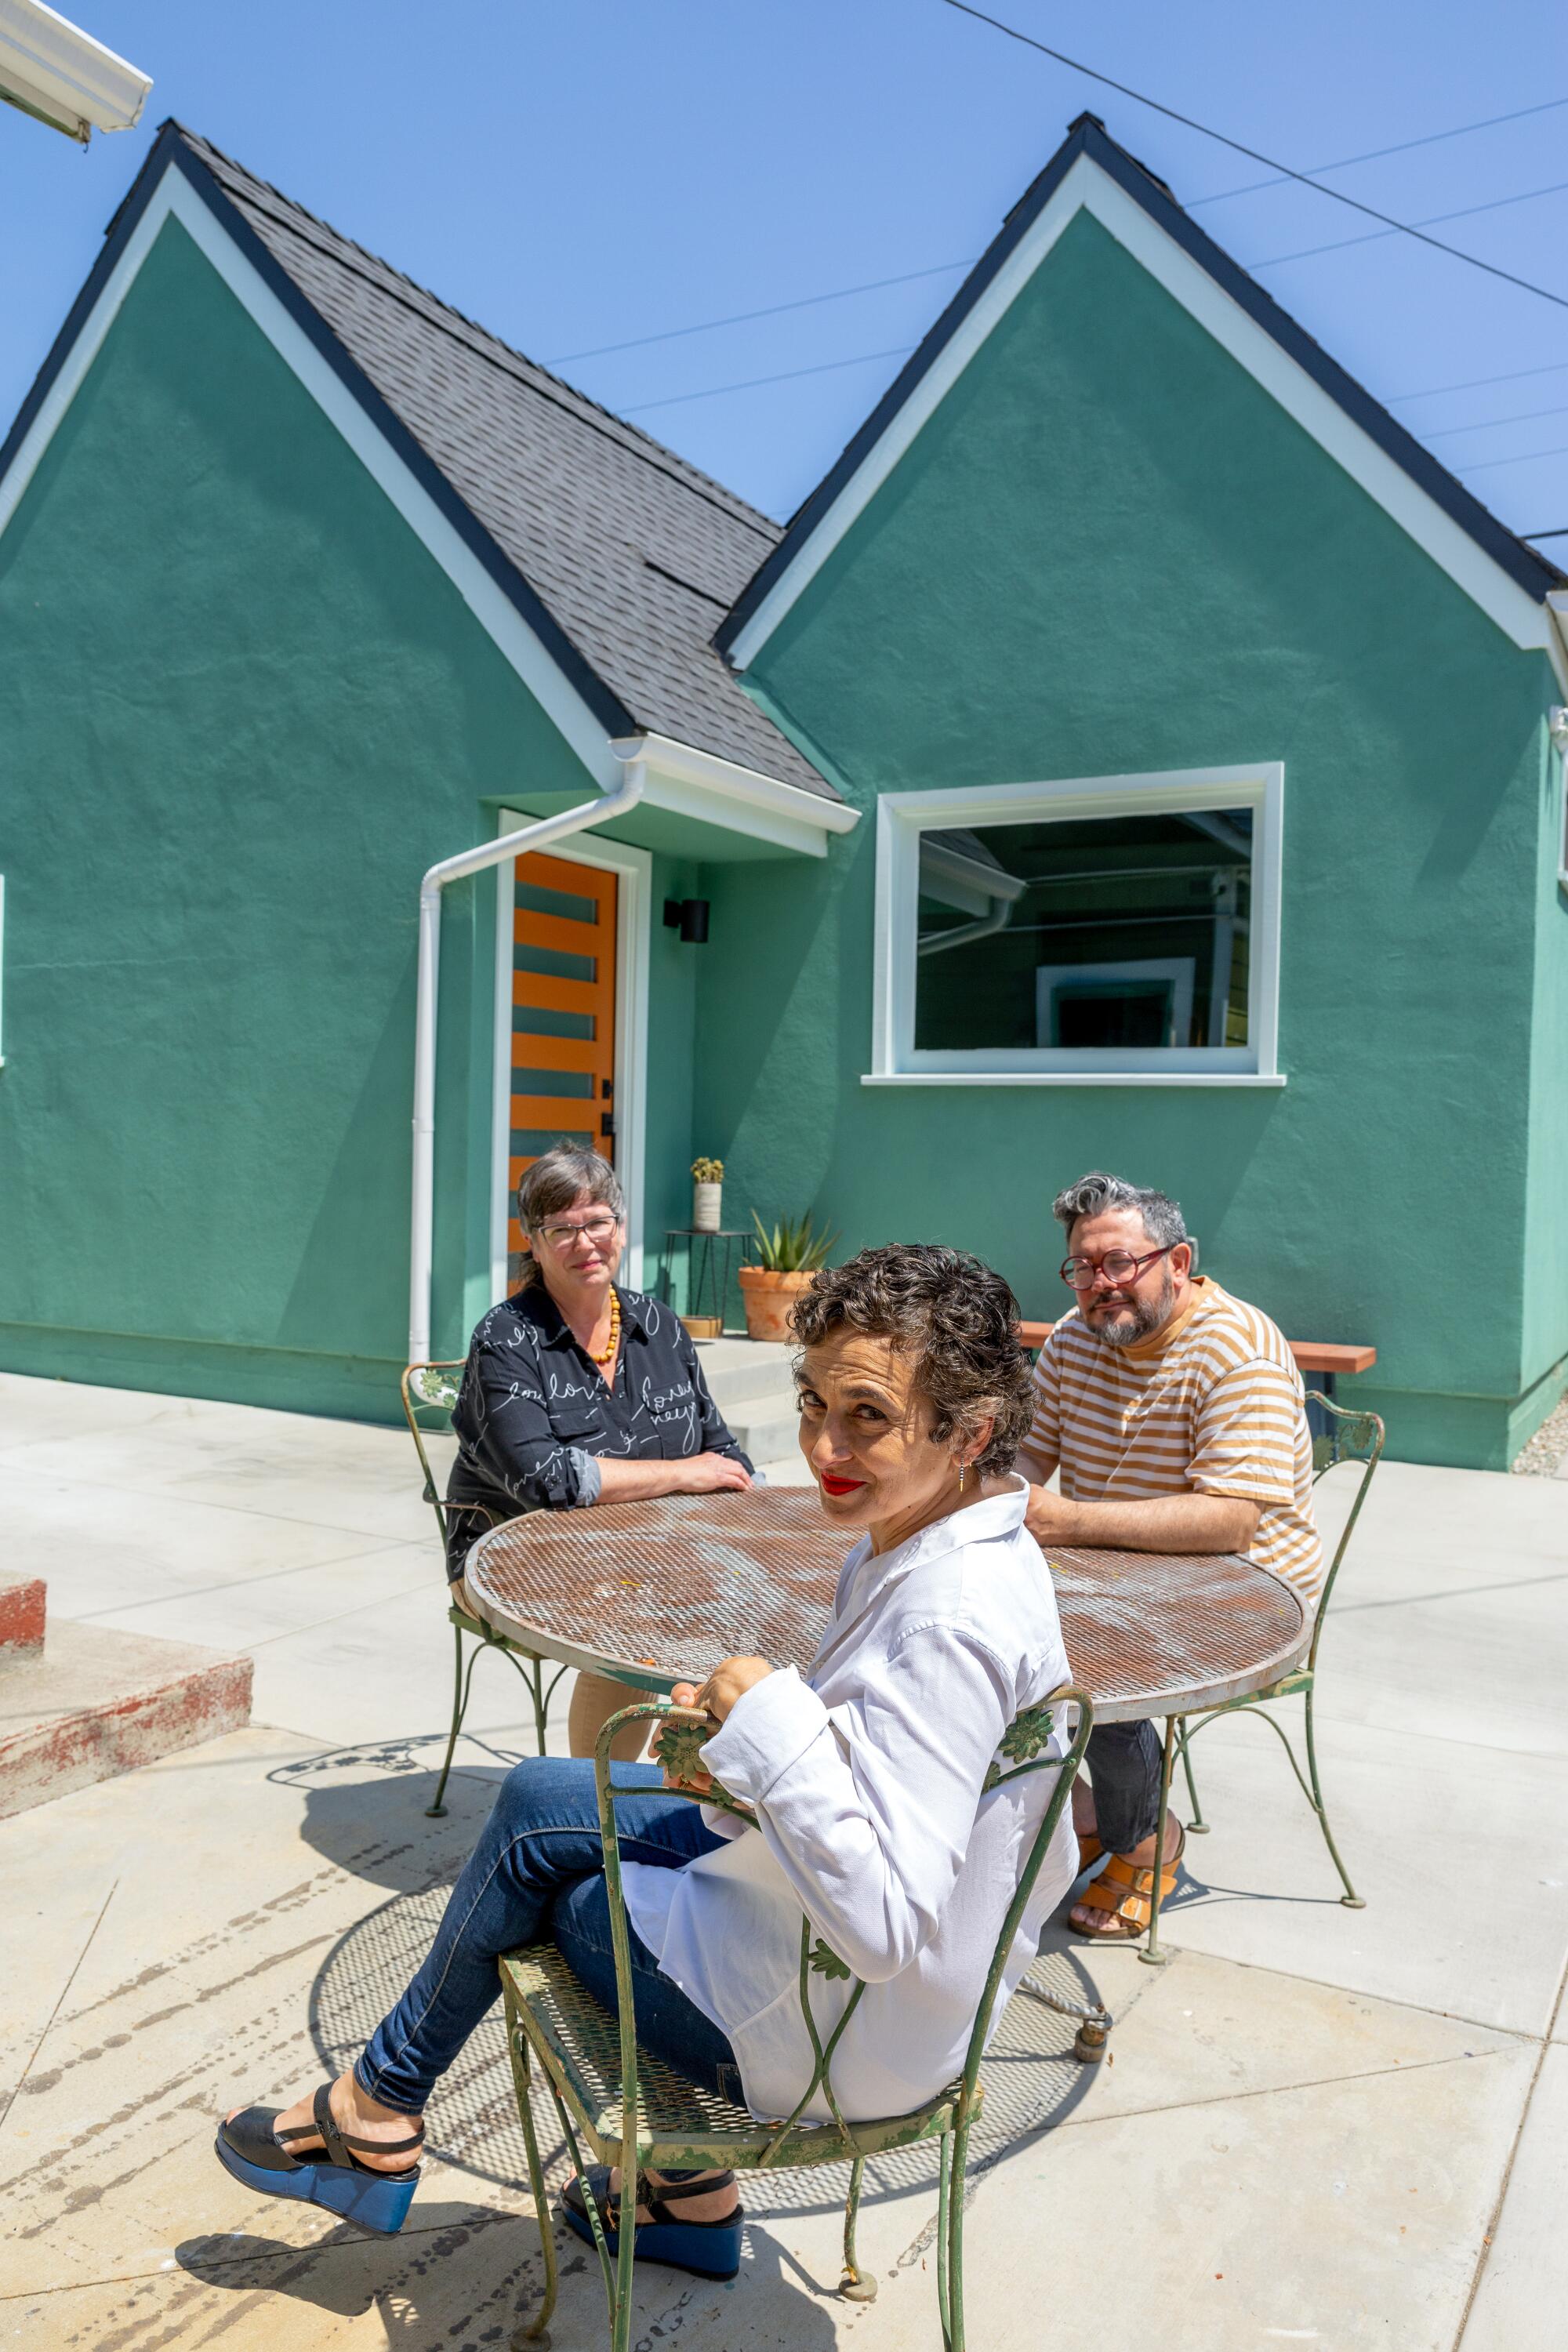 Architect Rachel Allen and homeowners Julie Zemel and Vladimir Gallegos in front of a green ADU